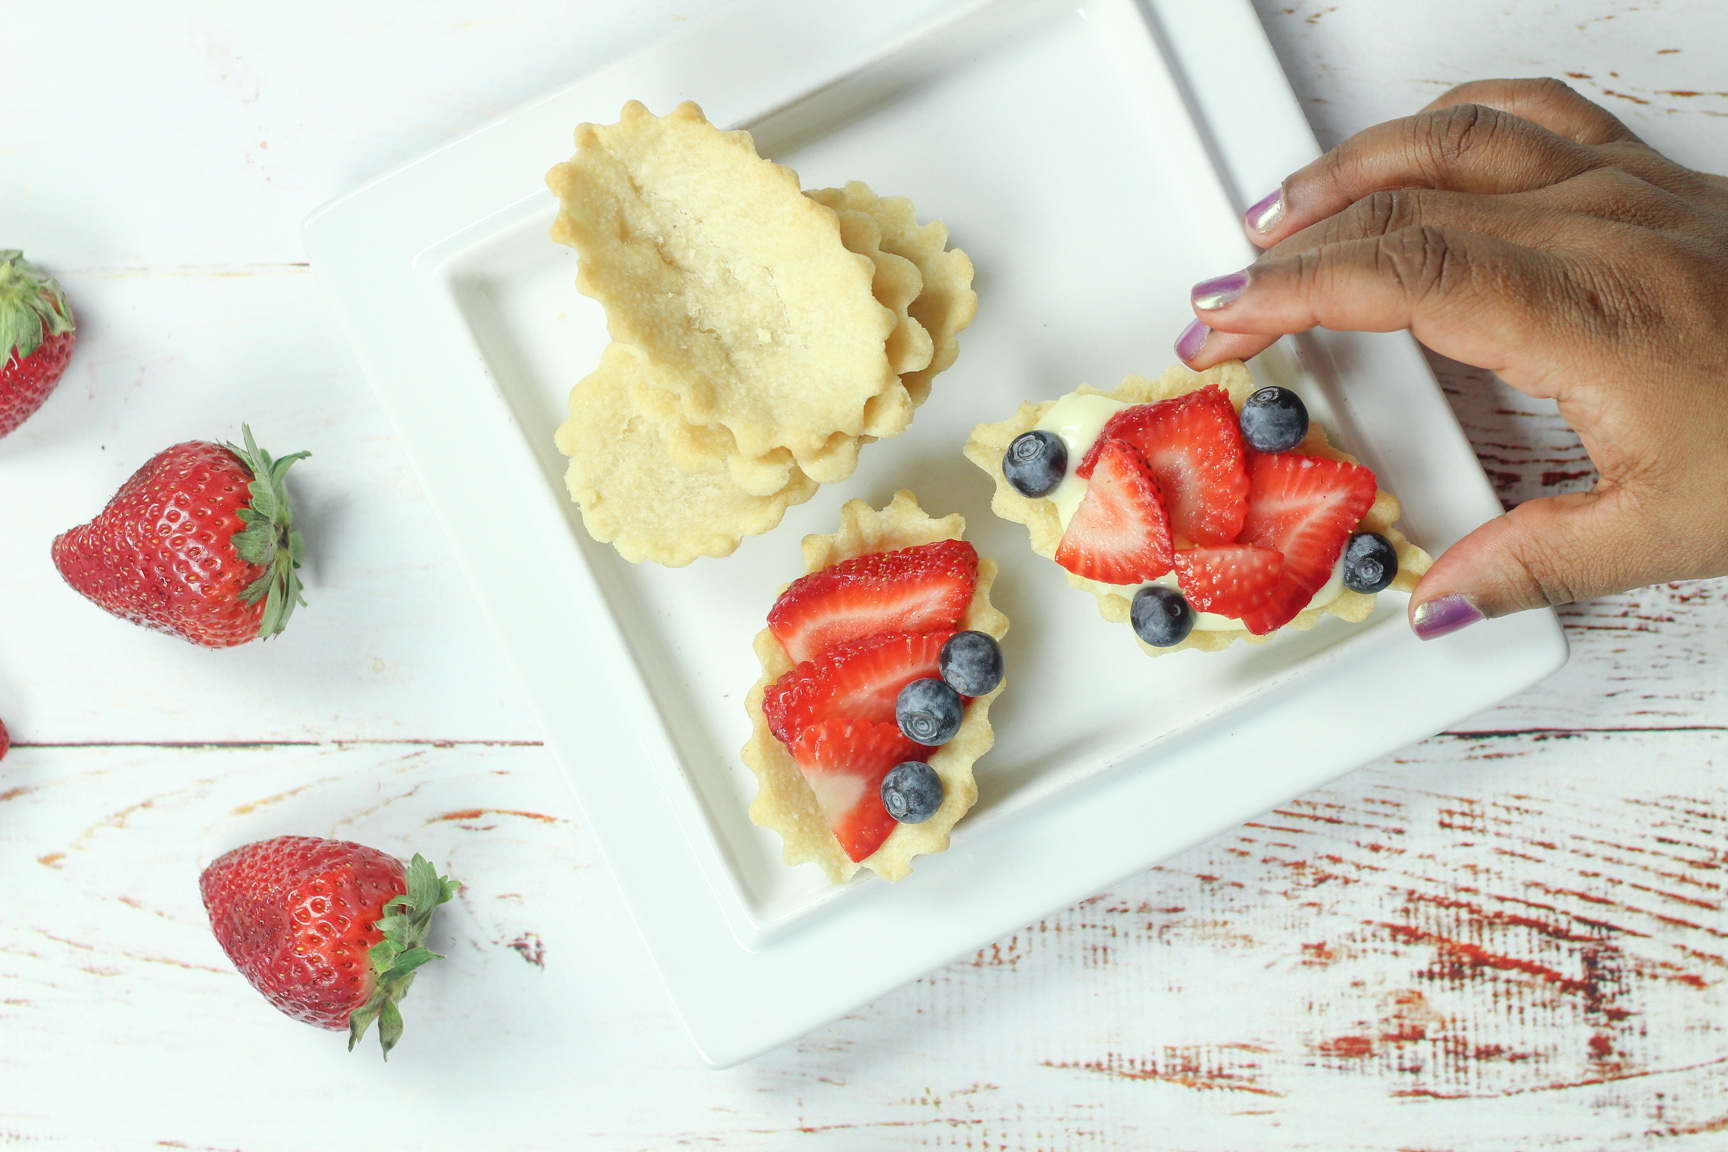 tarts with berries